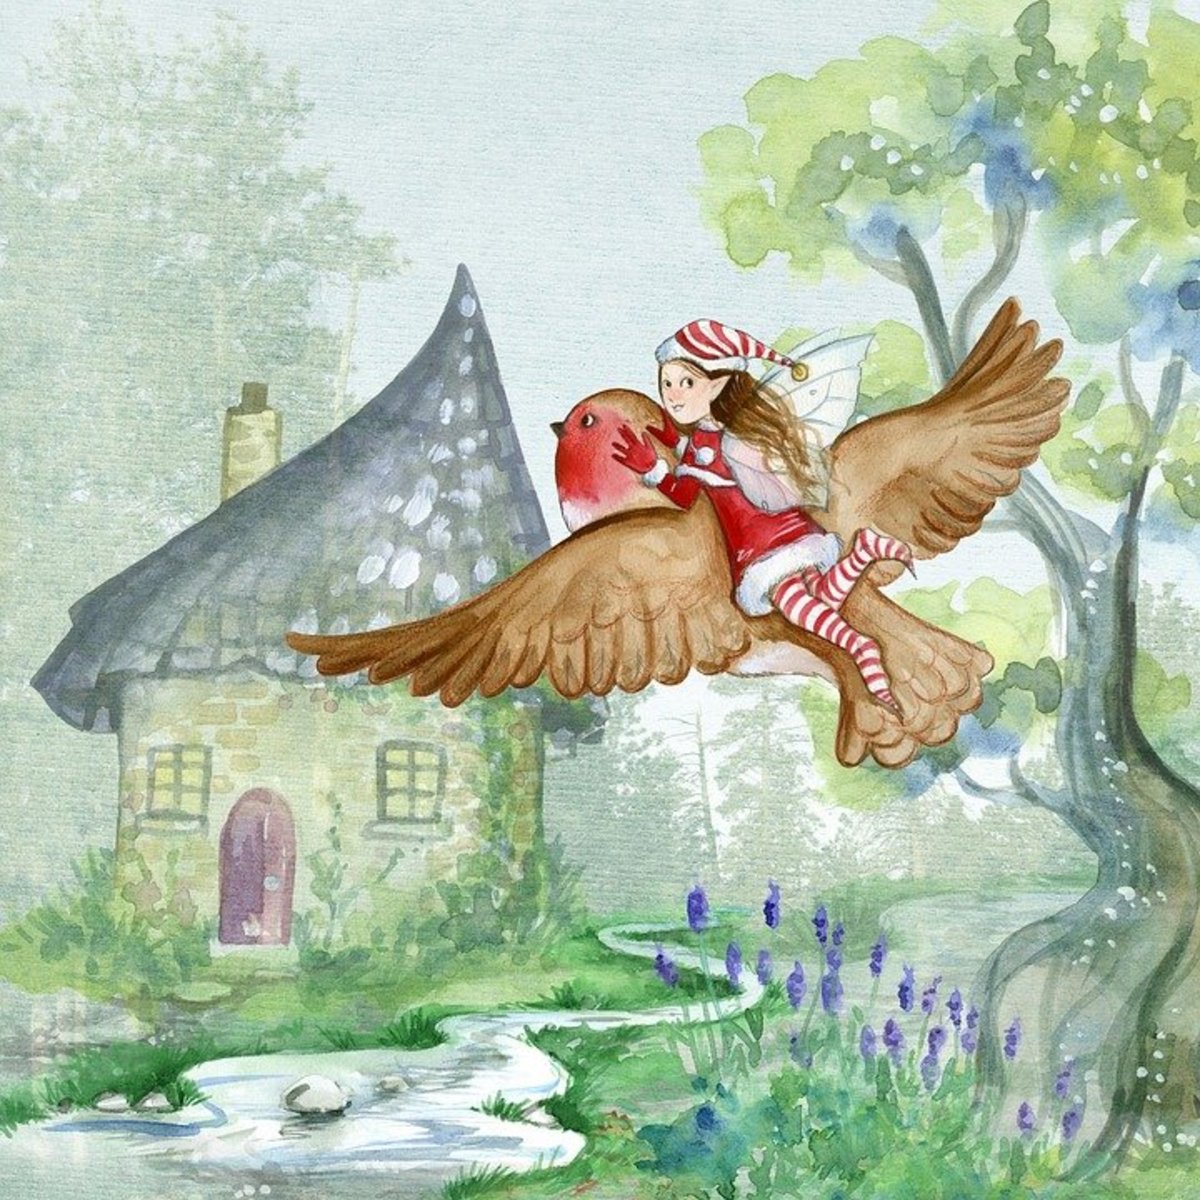 Don't Fall For The Asperger's Syndrome Fairy Tale!